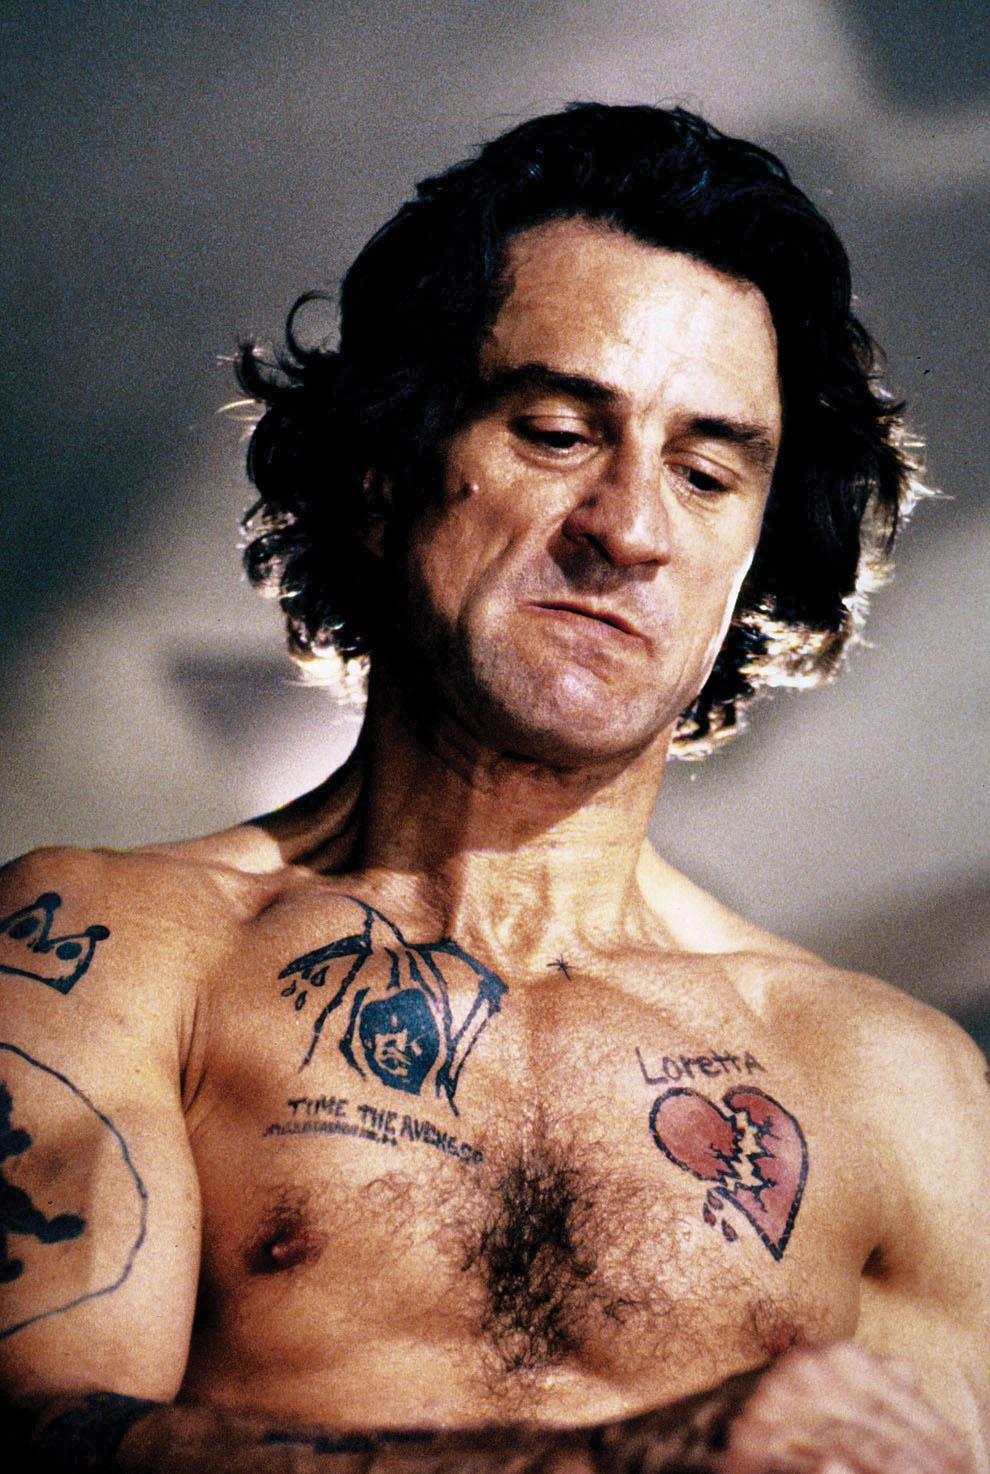 De Niro, shirtless and covered in tattoos